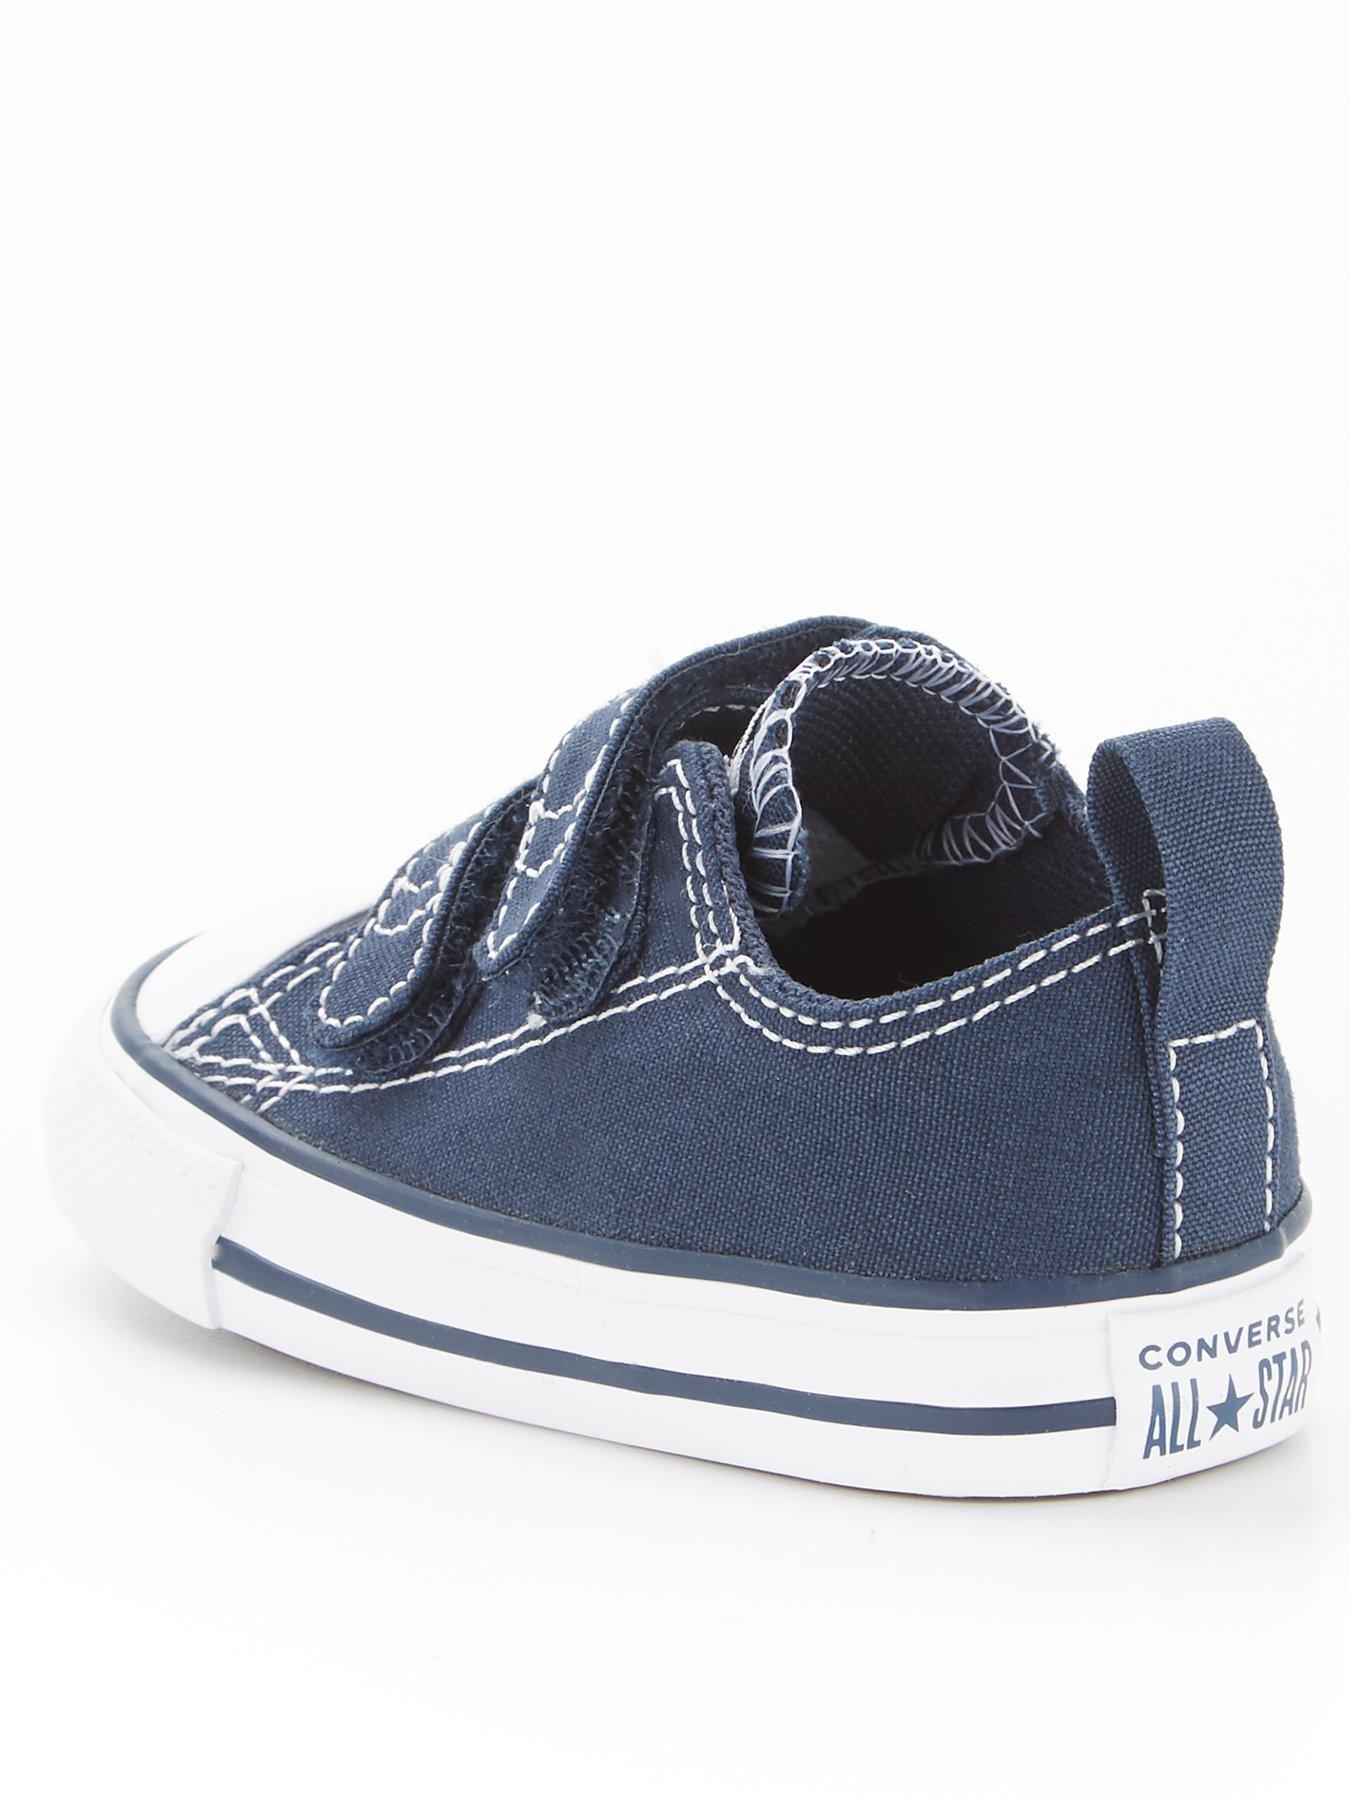 Trainers Chuck Taylor All Star Ox Infant Boys 2V Canvas Trainers -Navy/White